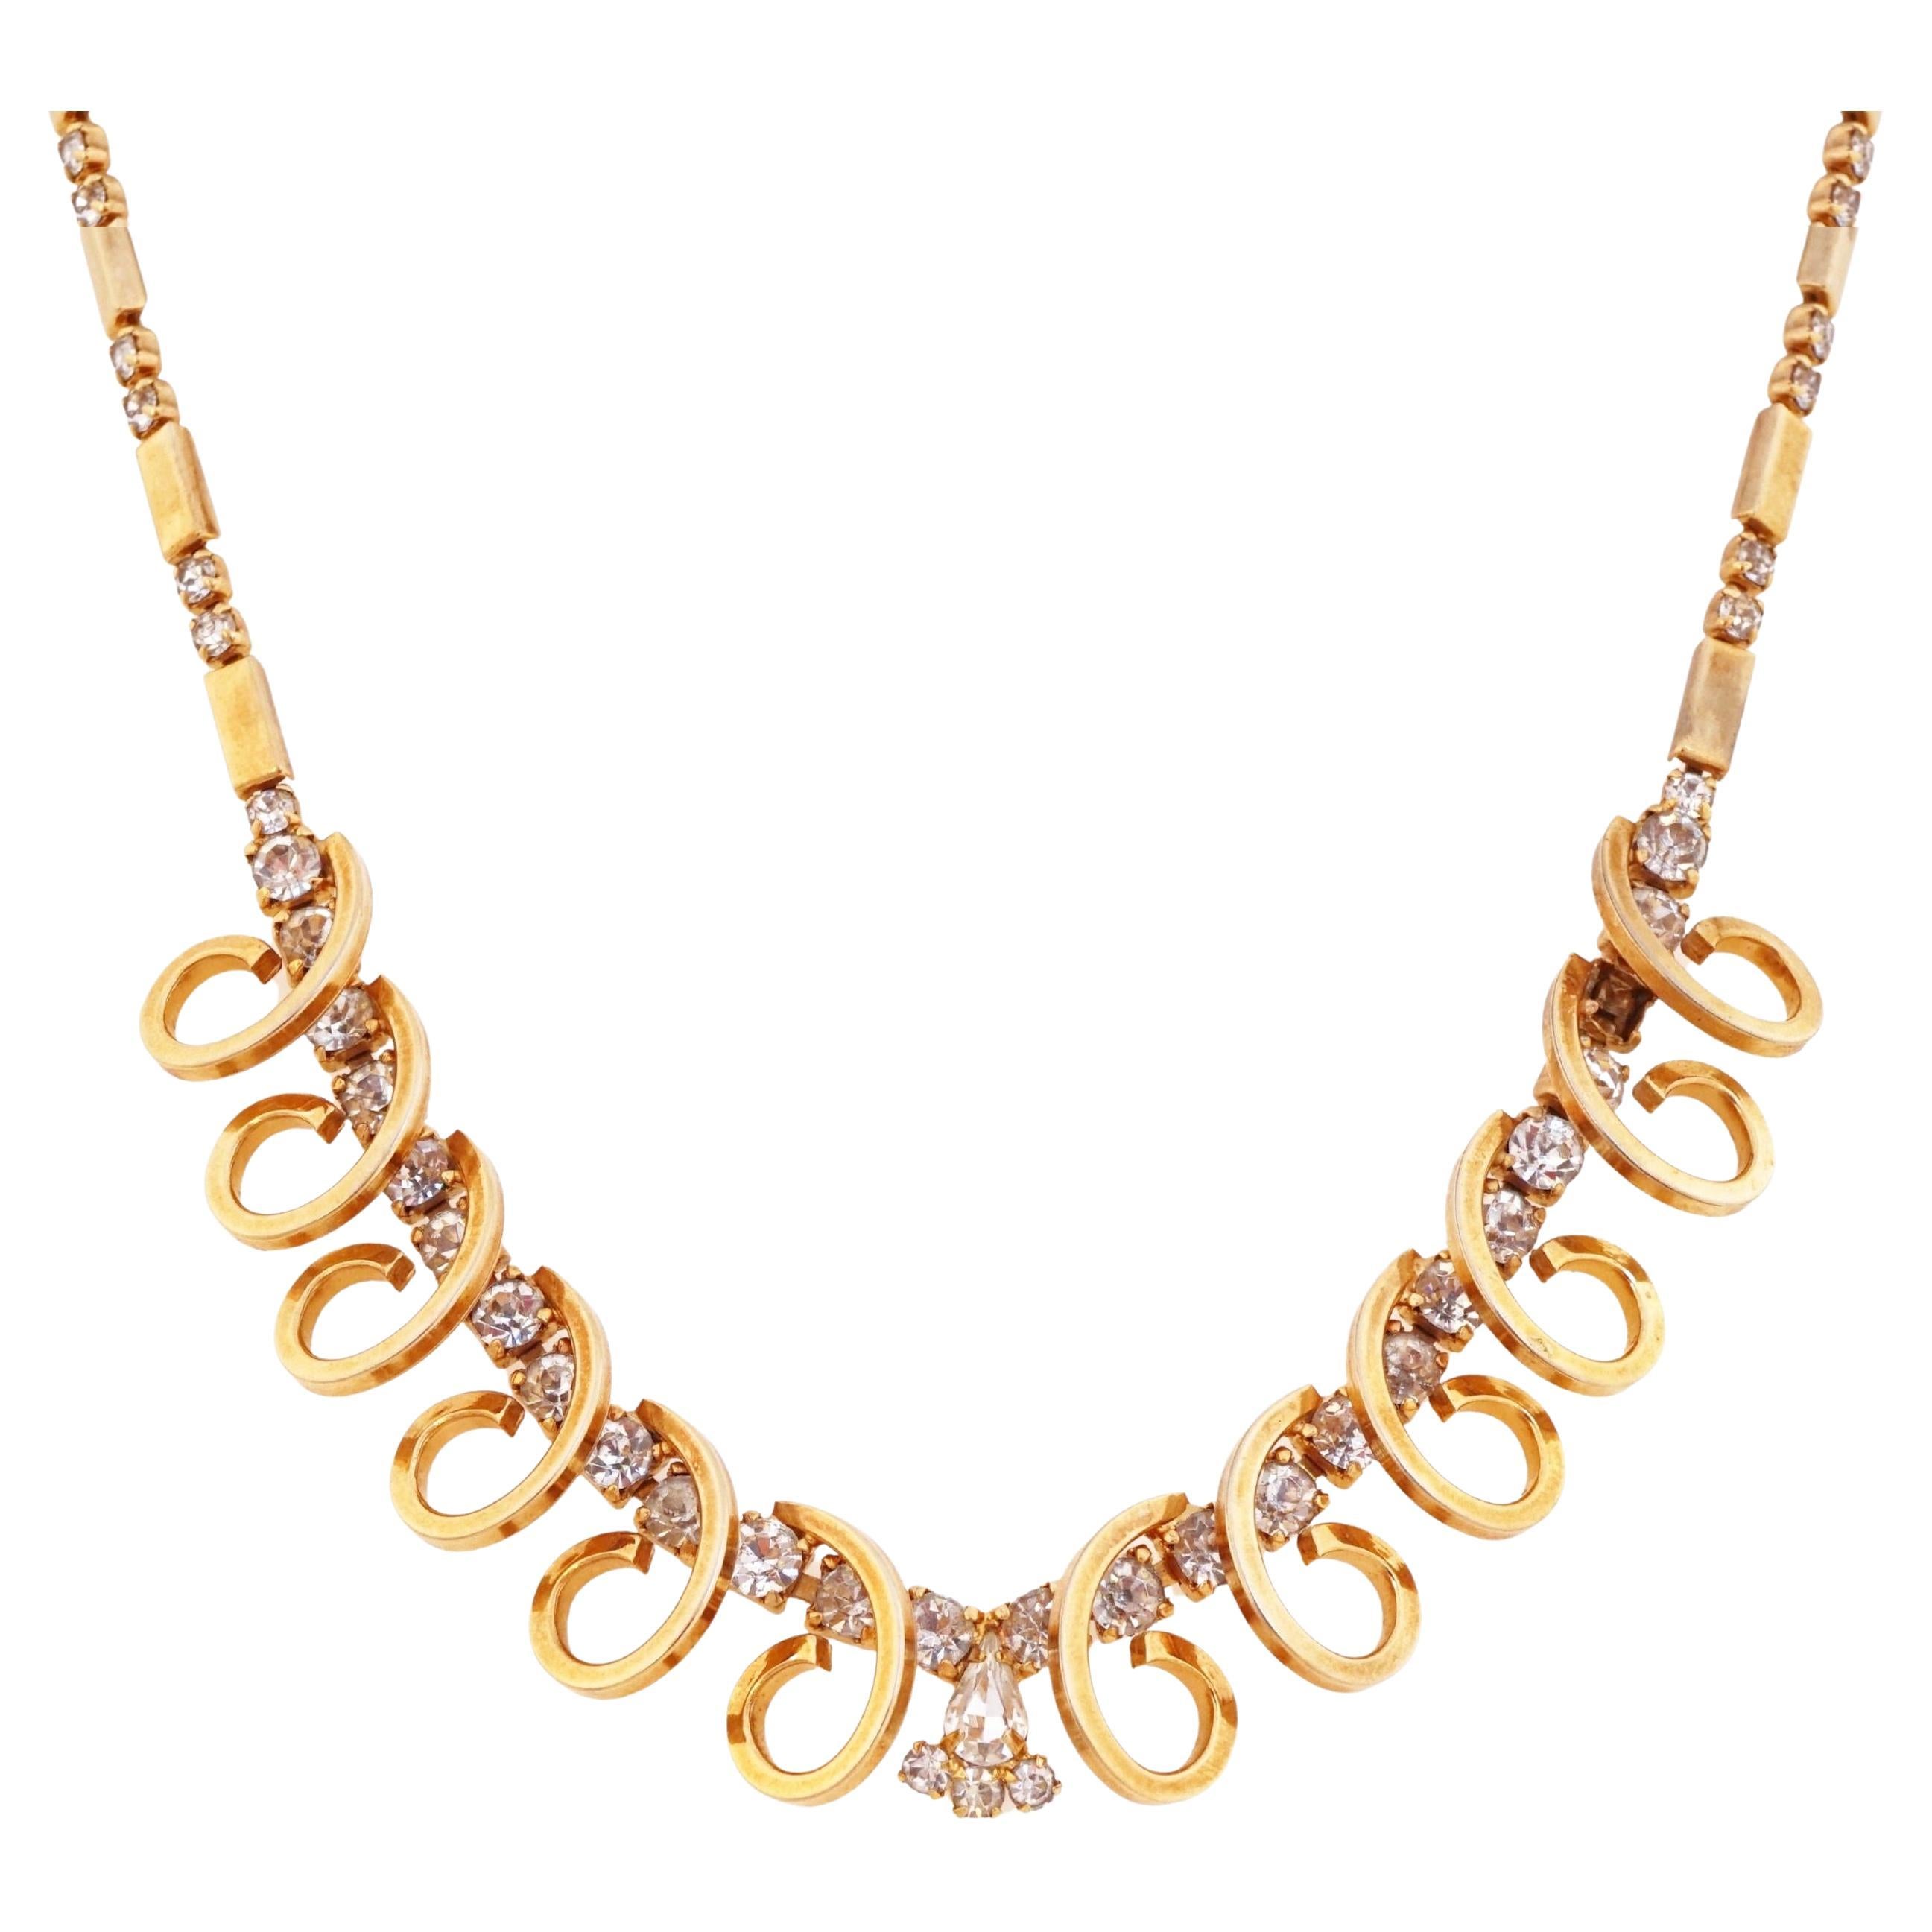 Gilded Swirl "Celestial Fire" Choker Necklace By Sarah Coventry, 1950s